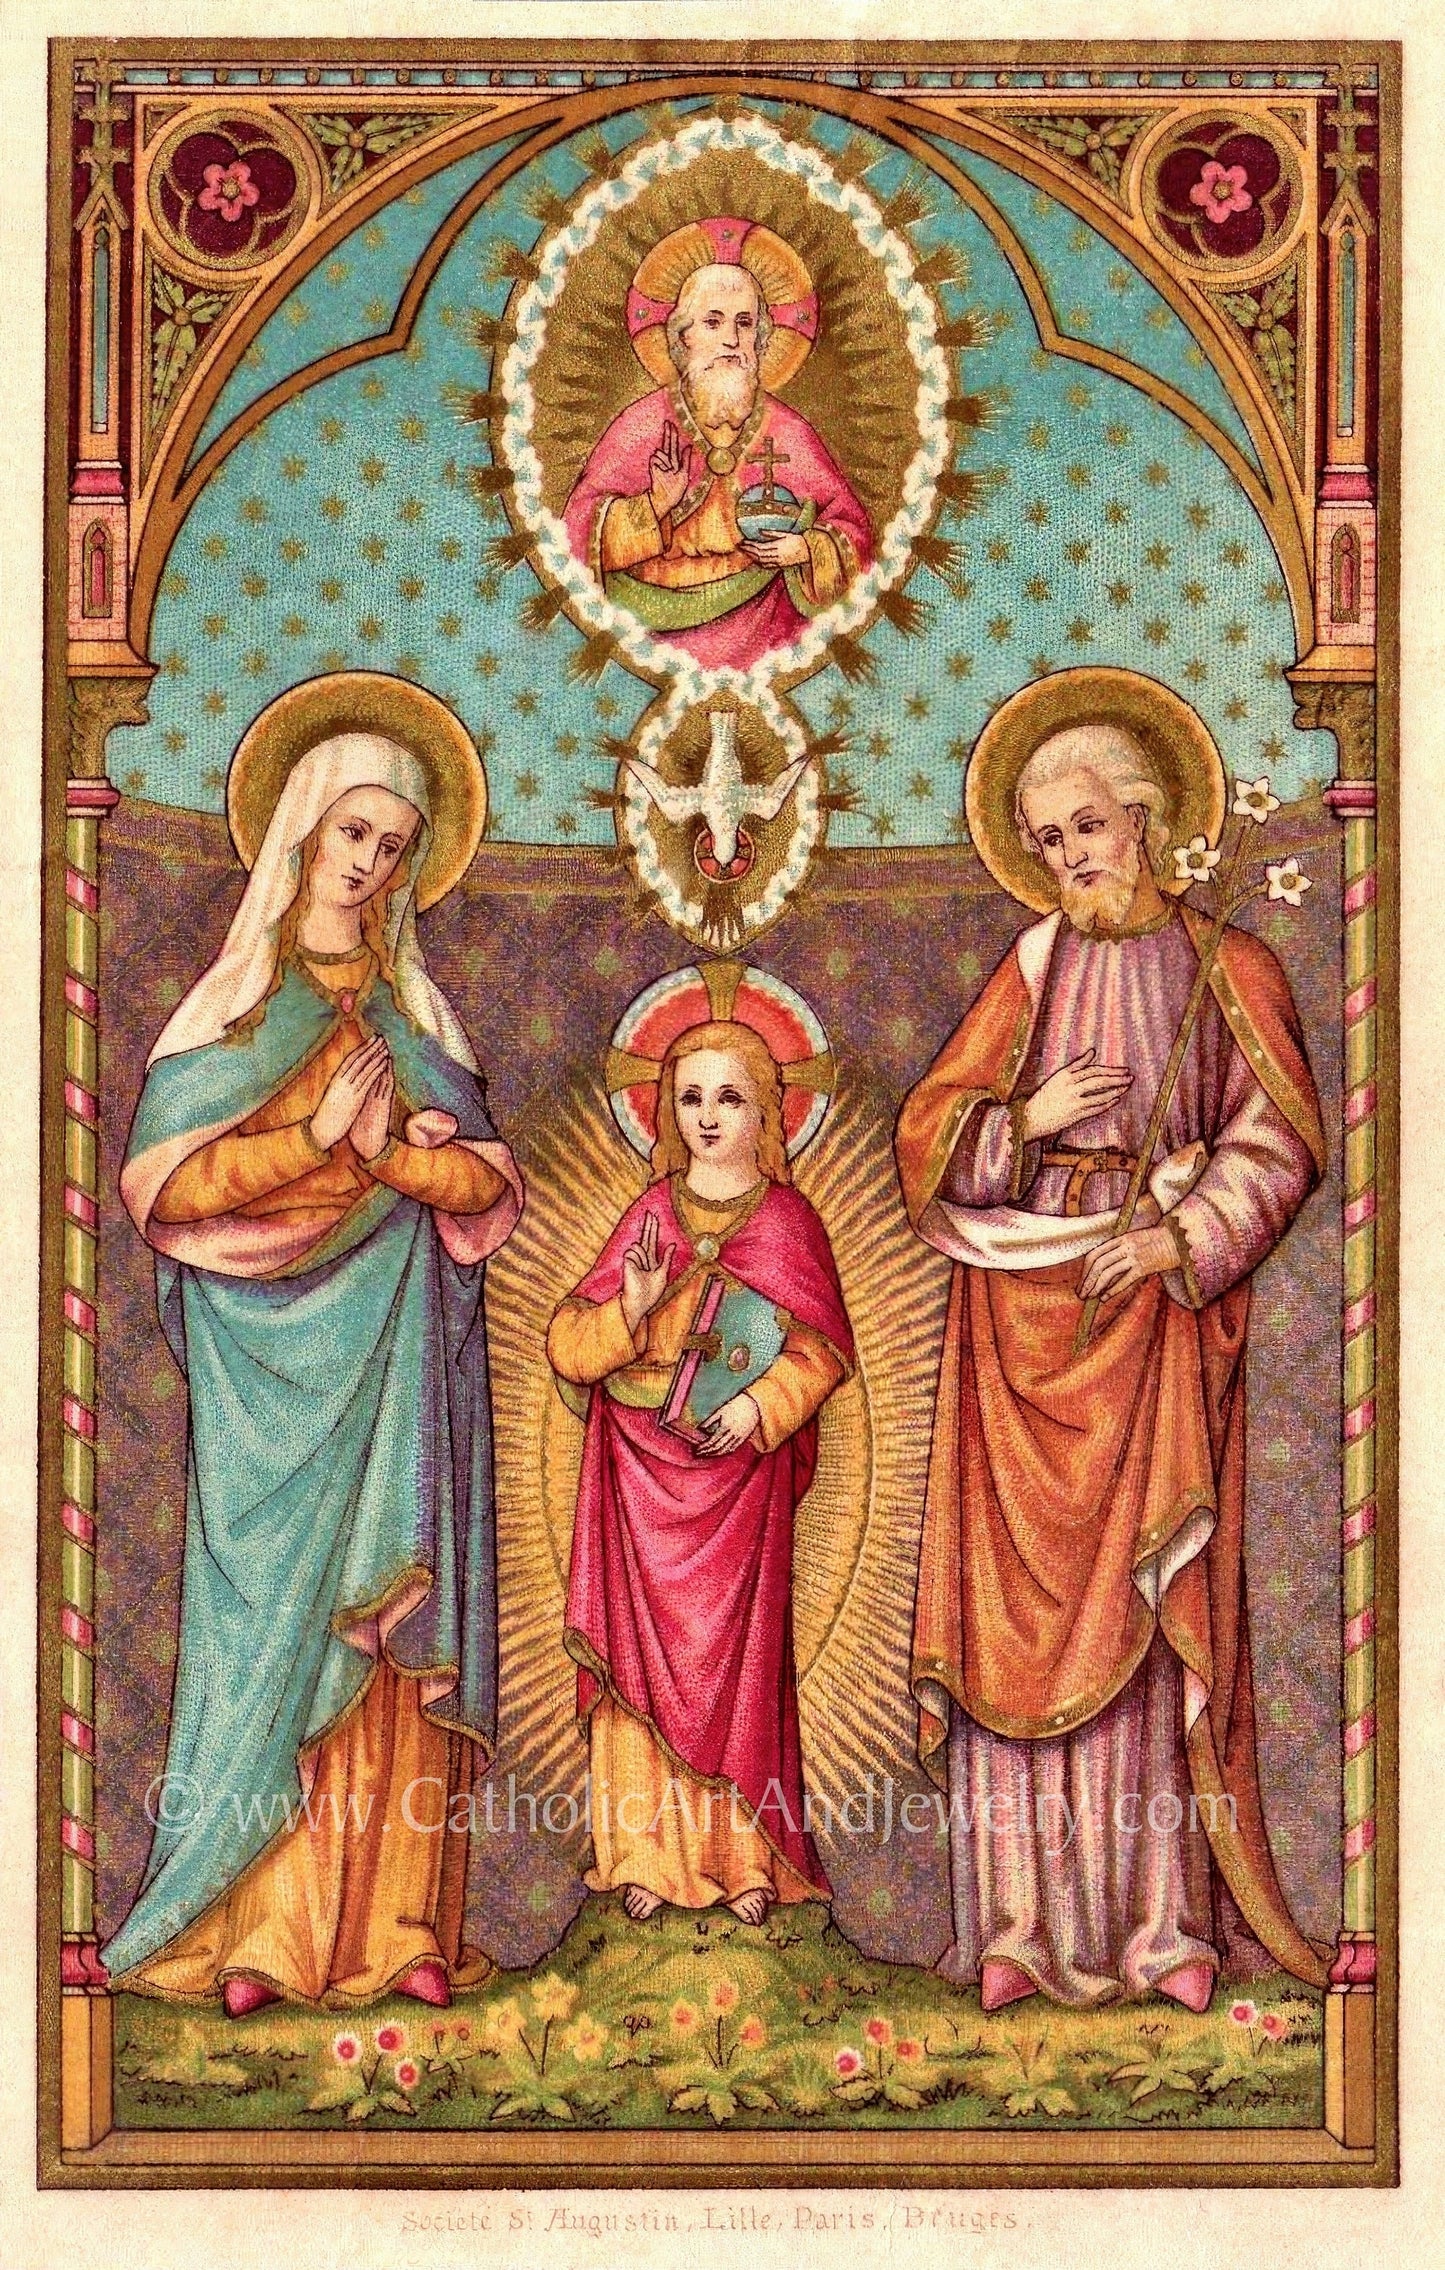 The Holy Family – Based on an Vintage Holy Card – Catholic Art Print – Archival Quality